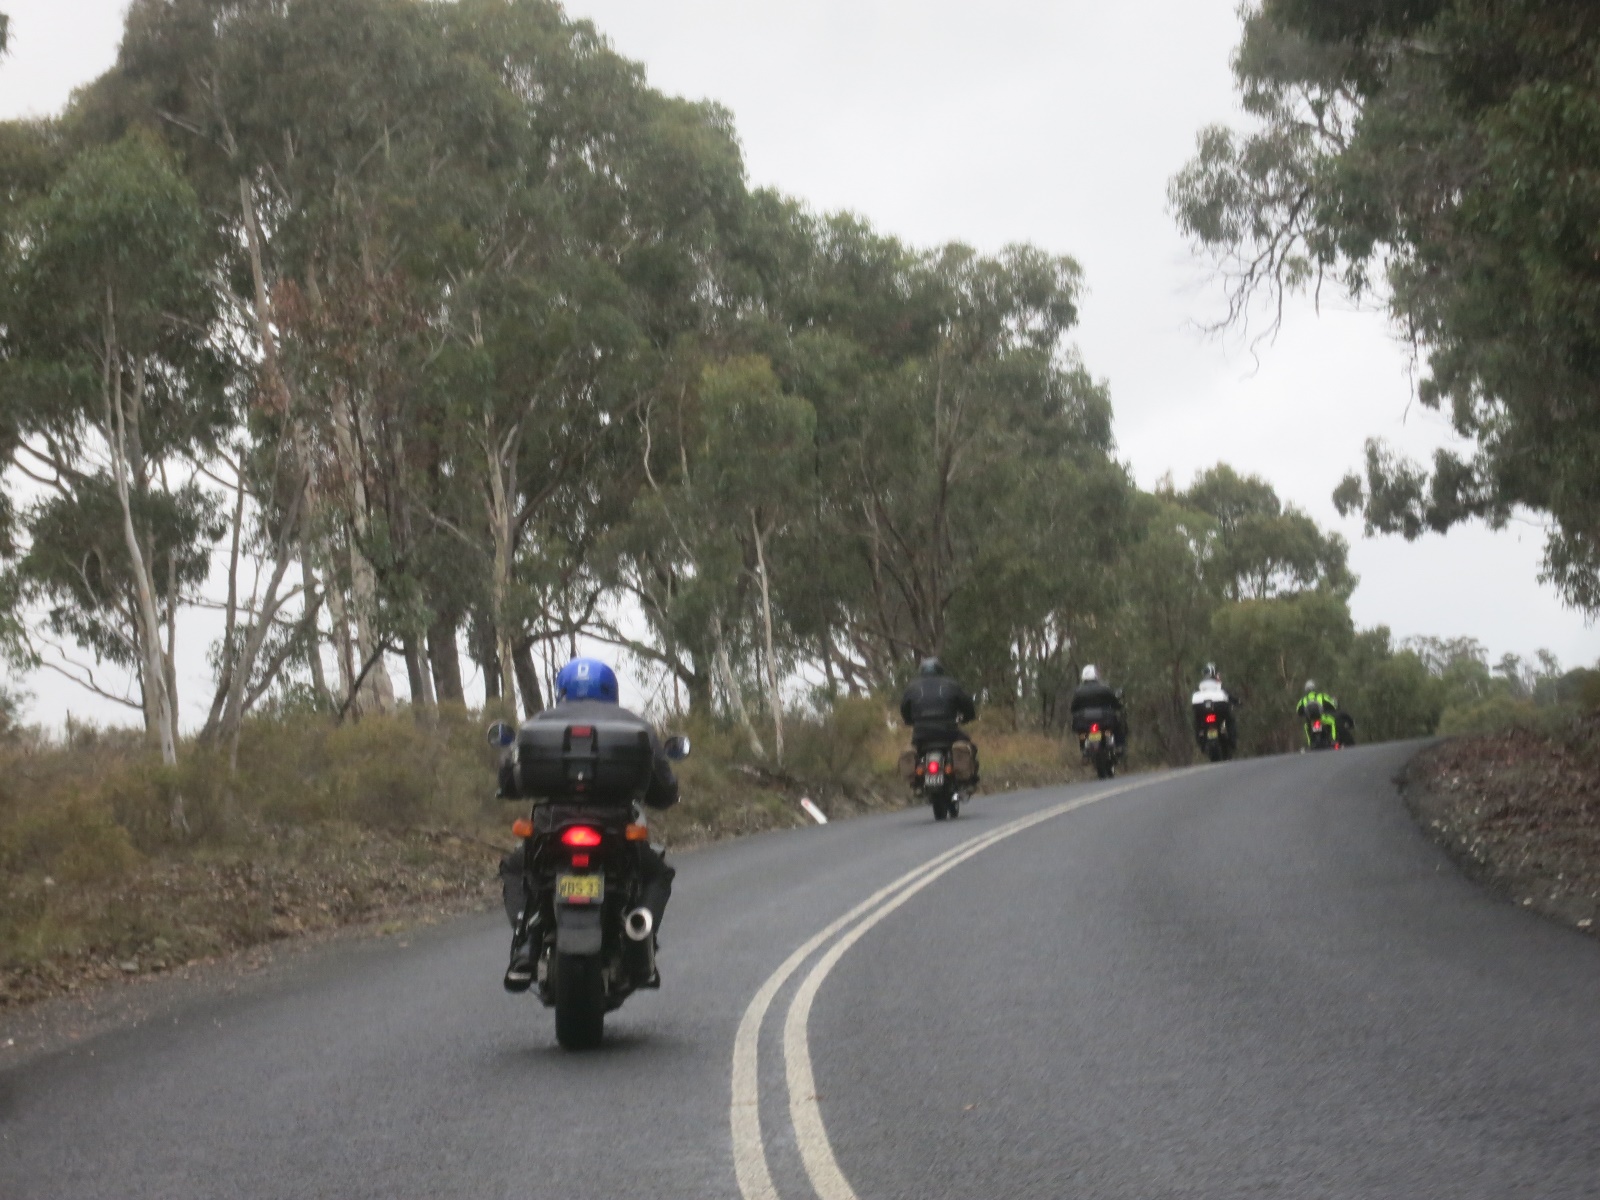 A group of motorcycles travel down a road

Description automatically generated with medium confidence